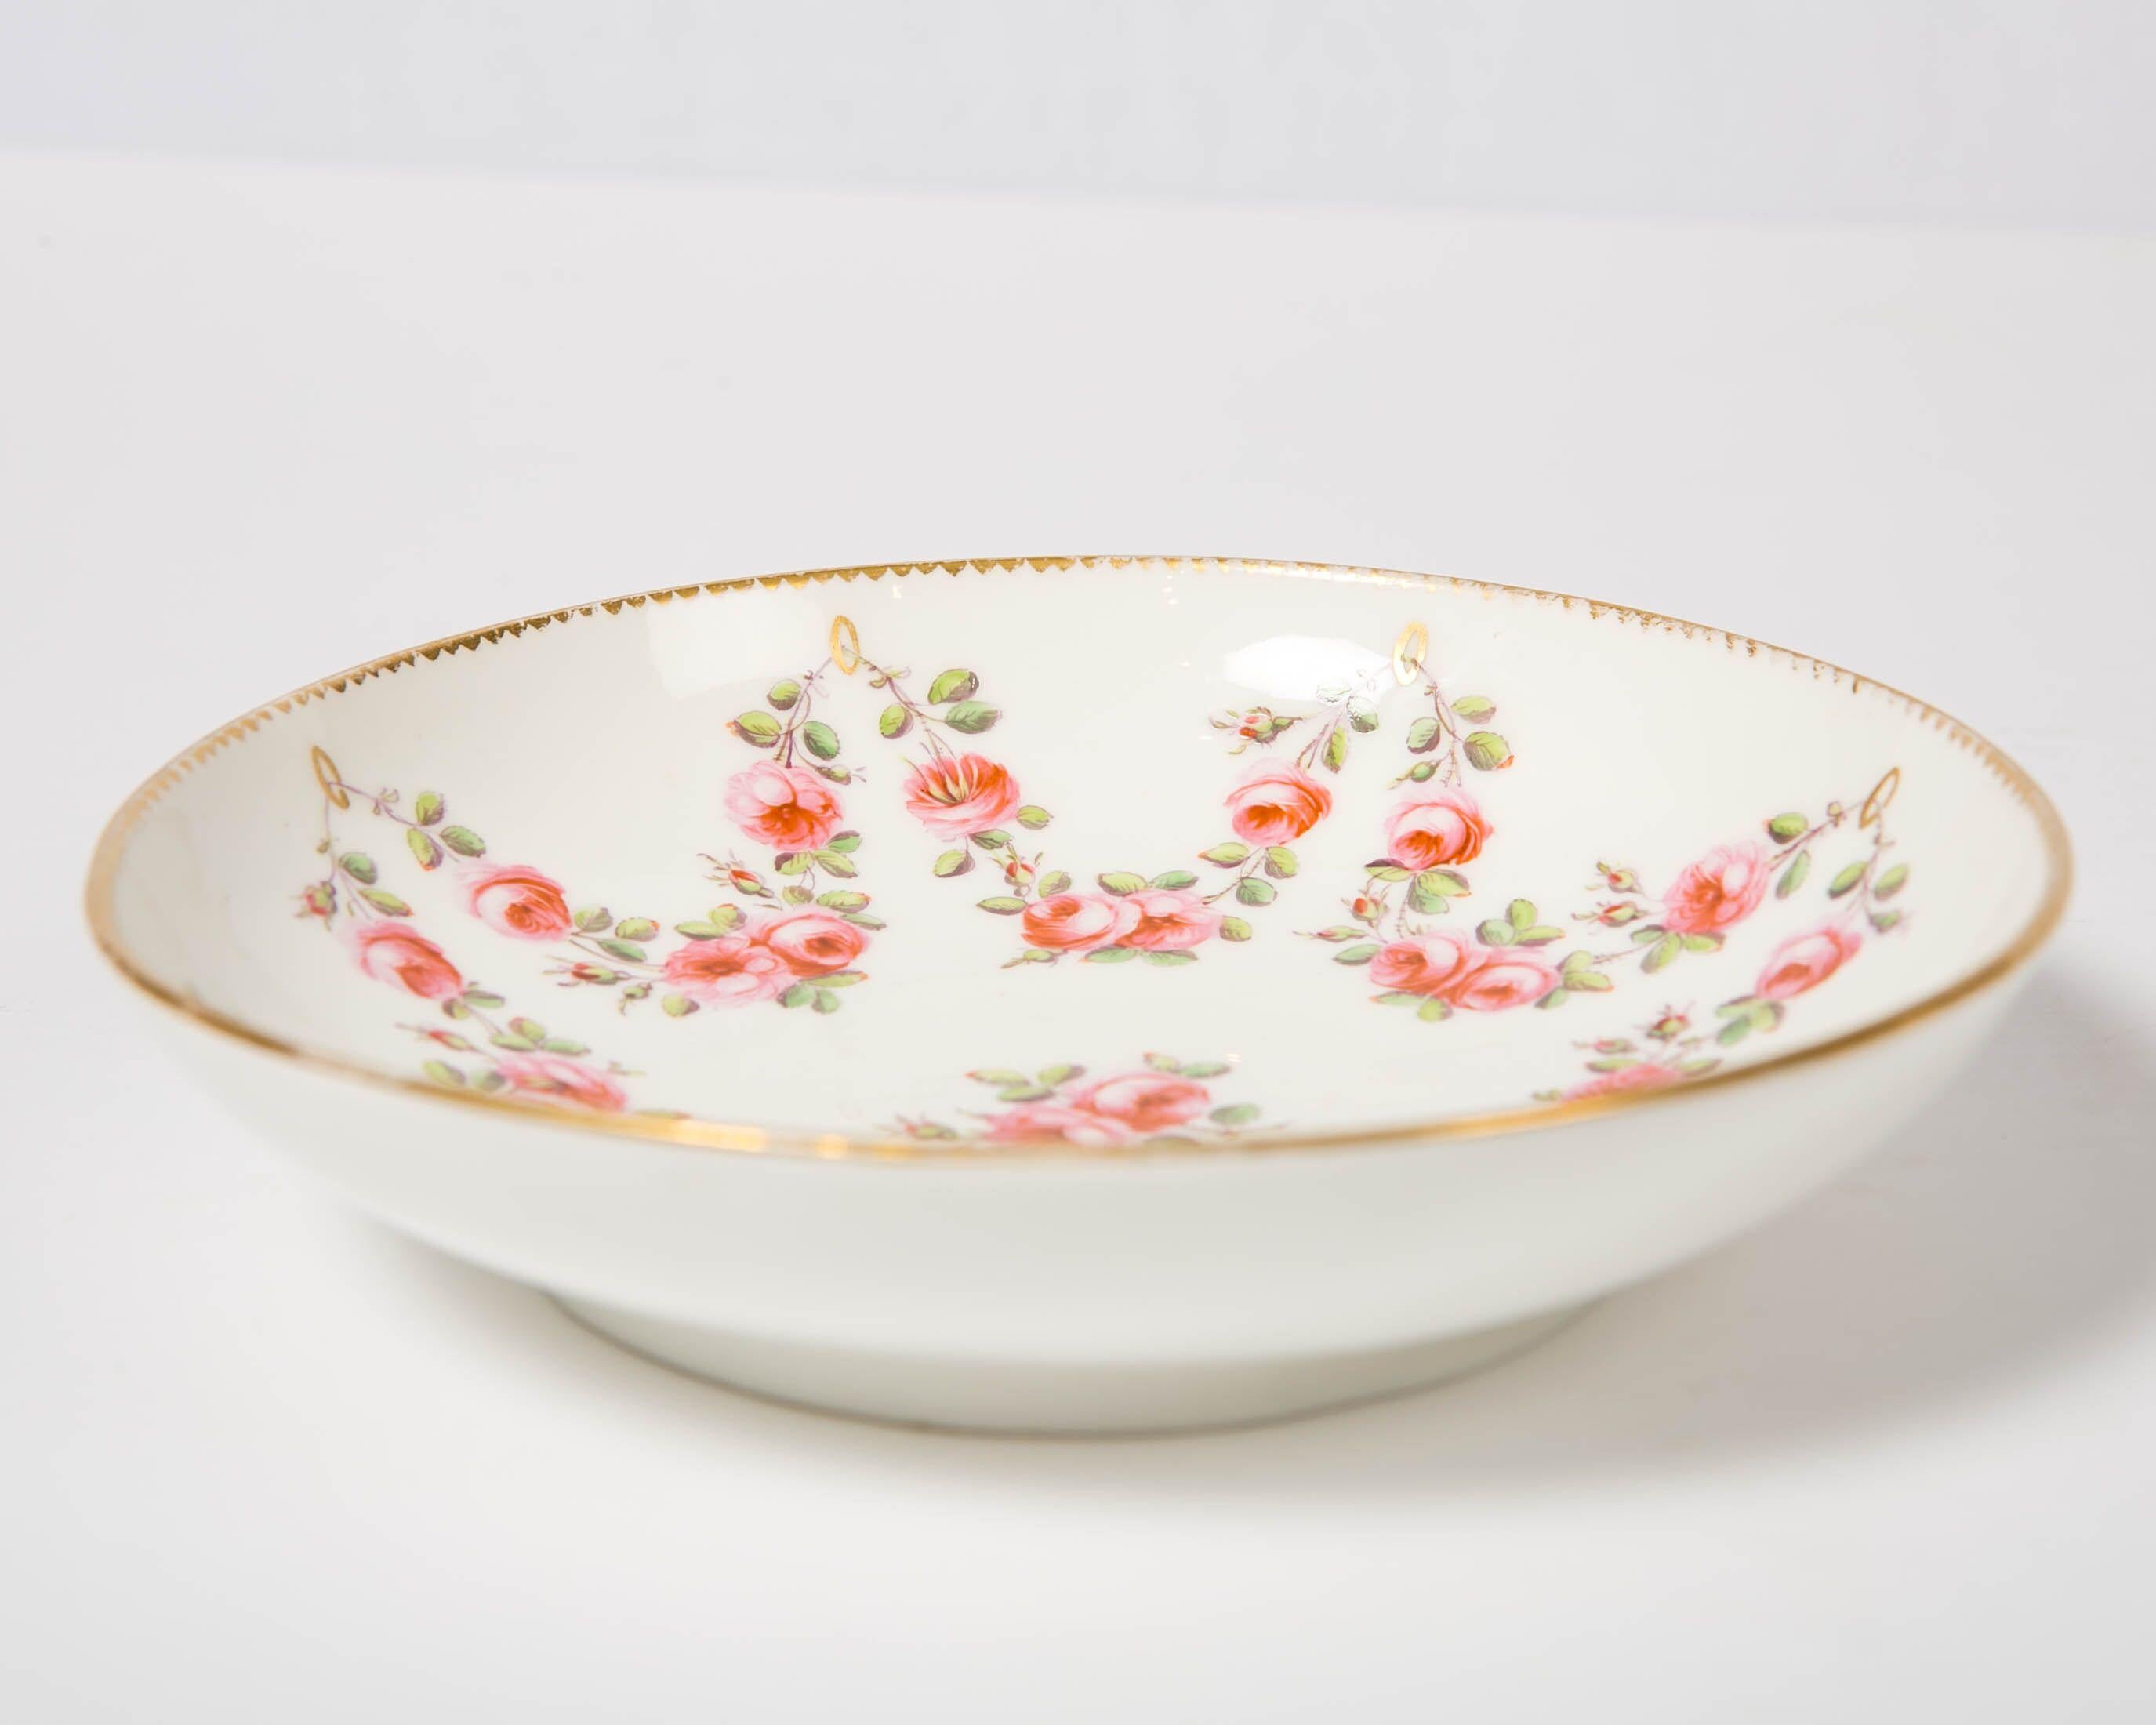 Nantgarw Porcelain Breakfast Cup and Saucer with Pink Roses Wales, 1813-1822 10